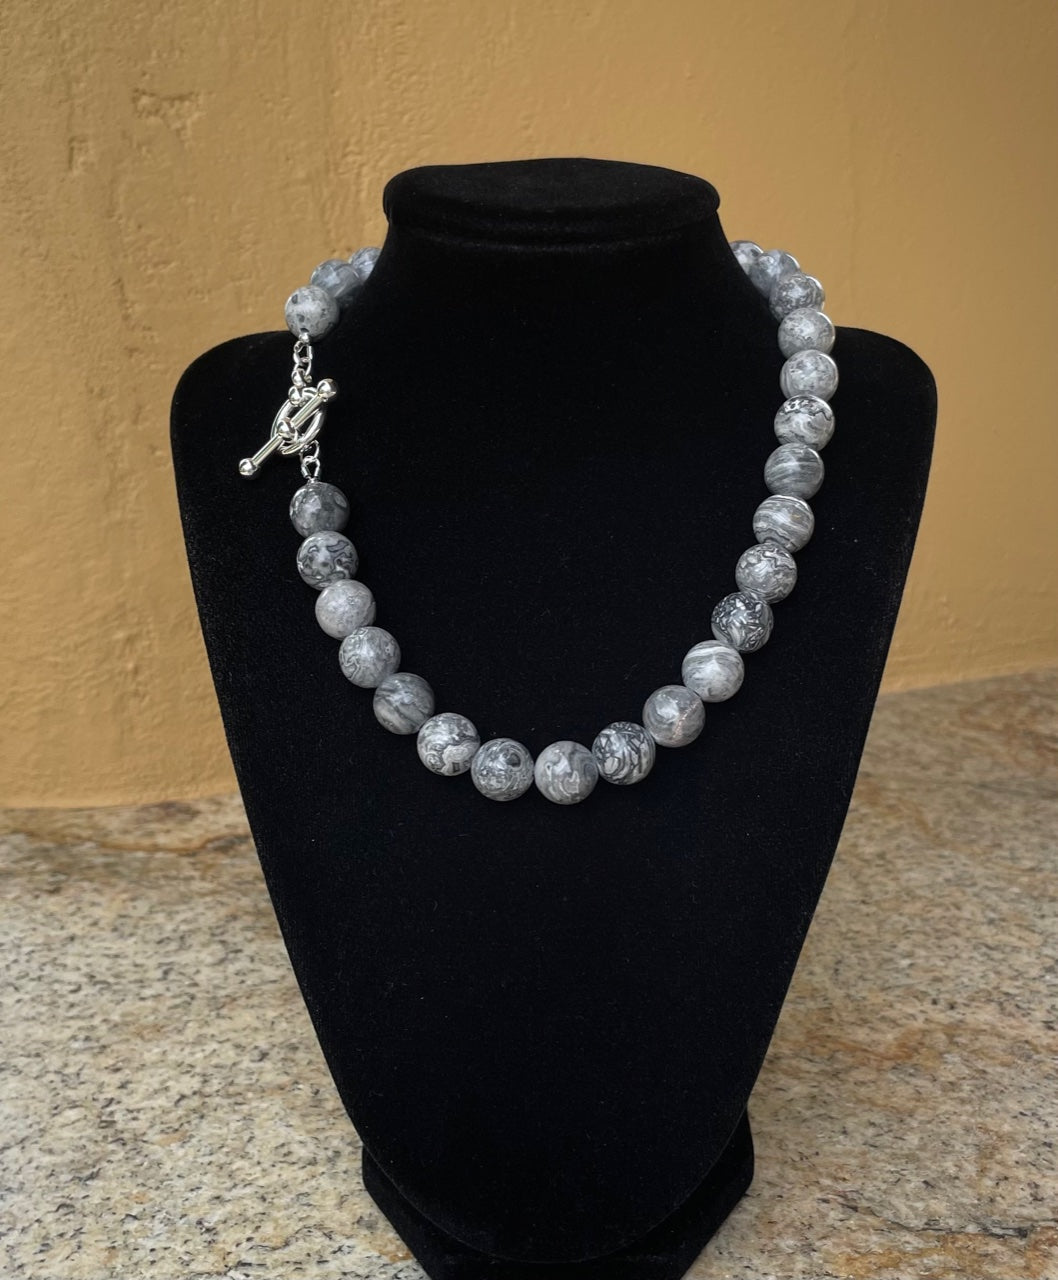 Necklace - 14mm grey jasper beads with a chunky sterling silver toggle